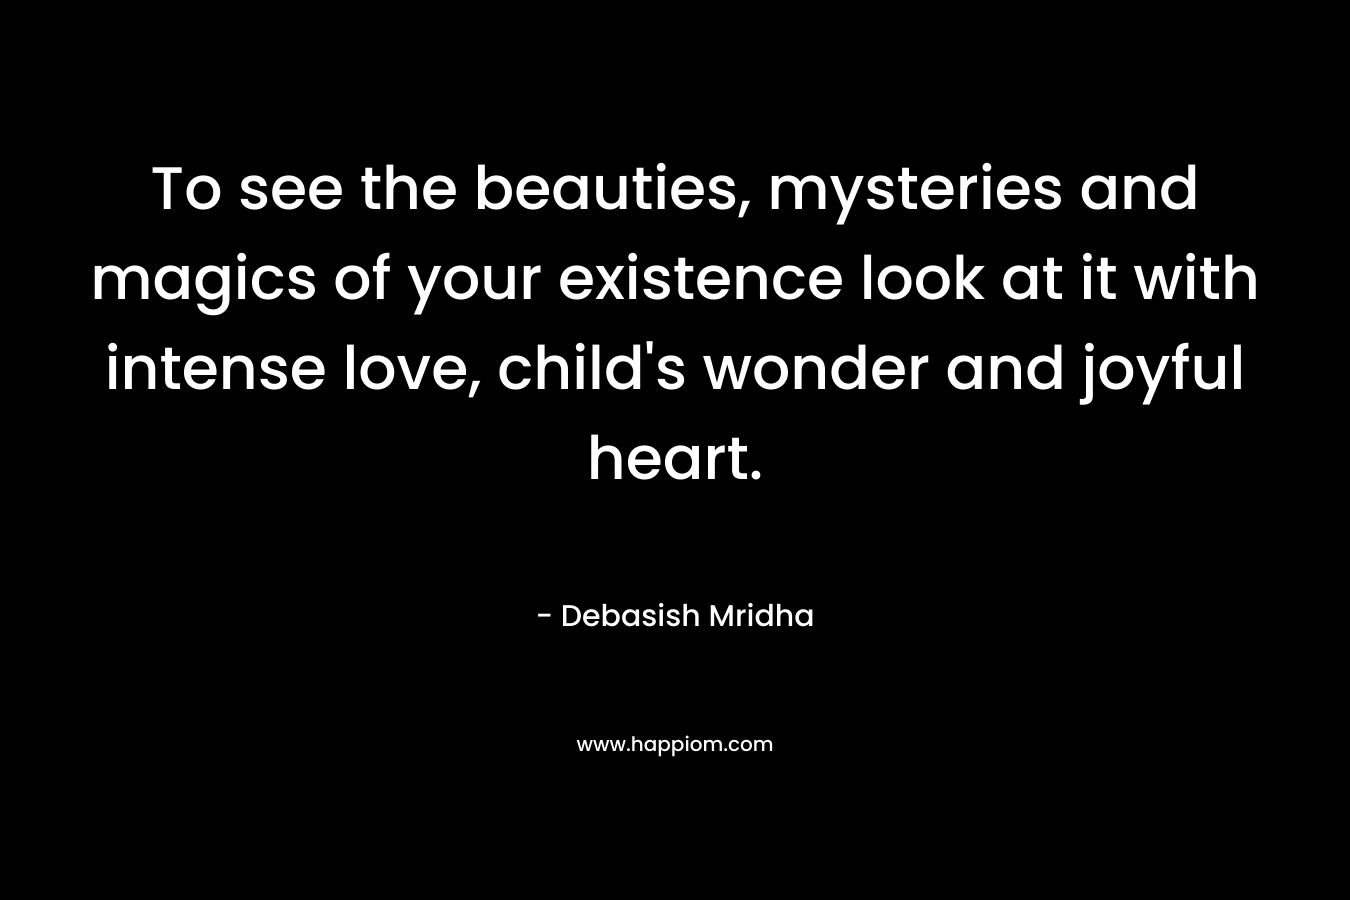 To see the beauties, mysteries and magics of your existence look at it with intense love, child's wonder and joyful heart.